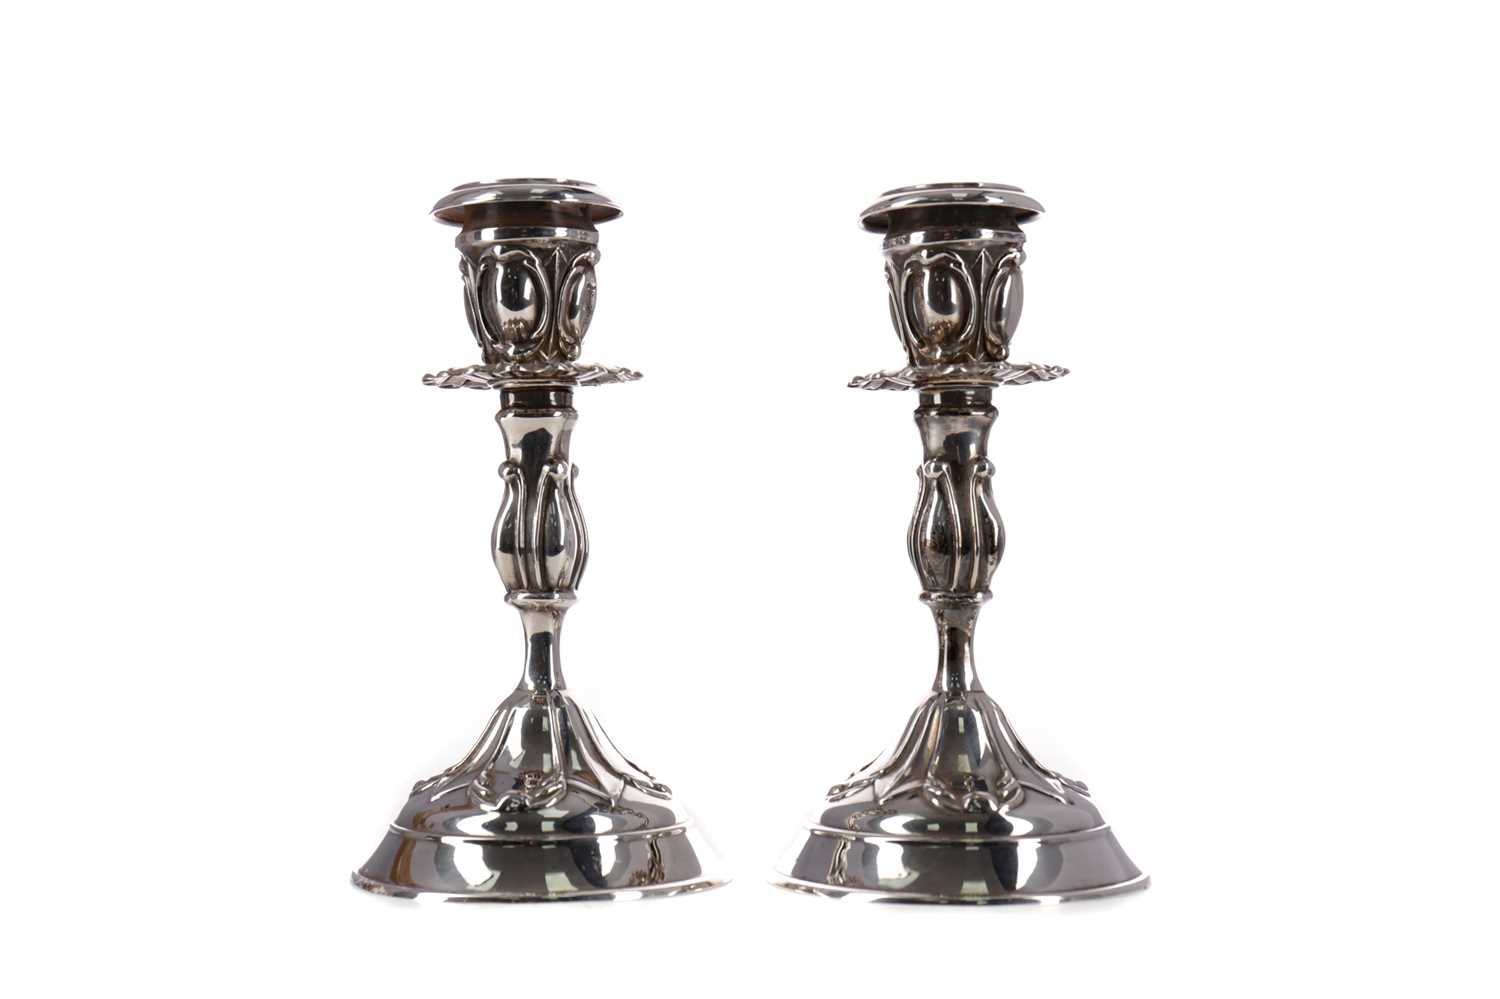 Lot 448 - A PAIR OF CONTINENTAL ARTS & CRAFTS SILVER CANDLESTICKS